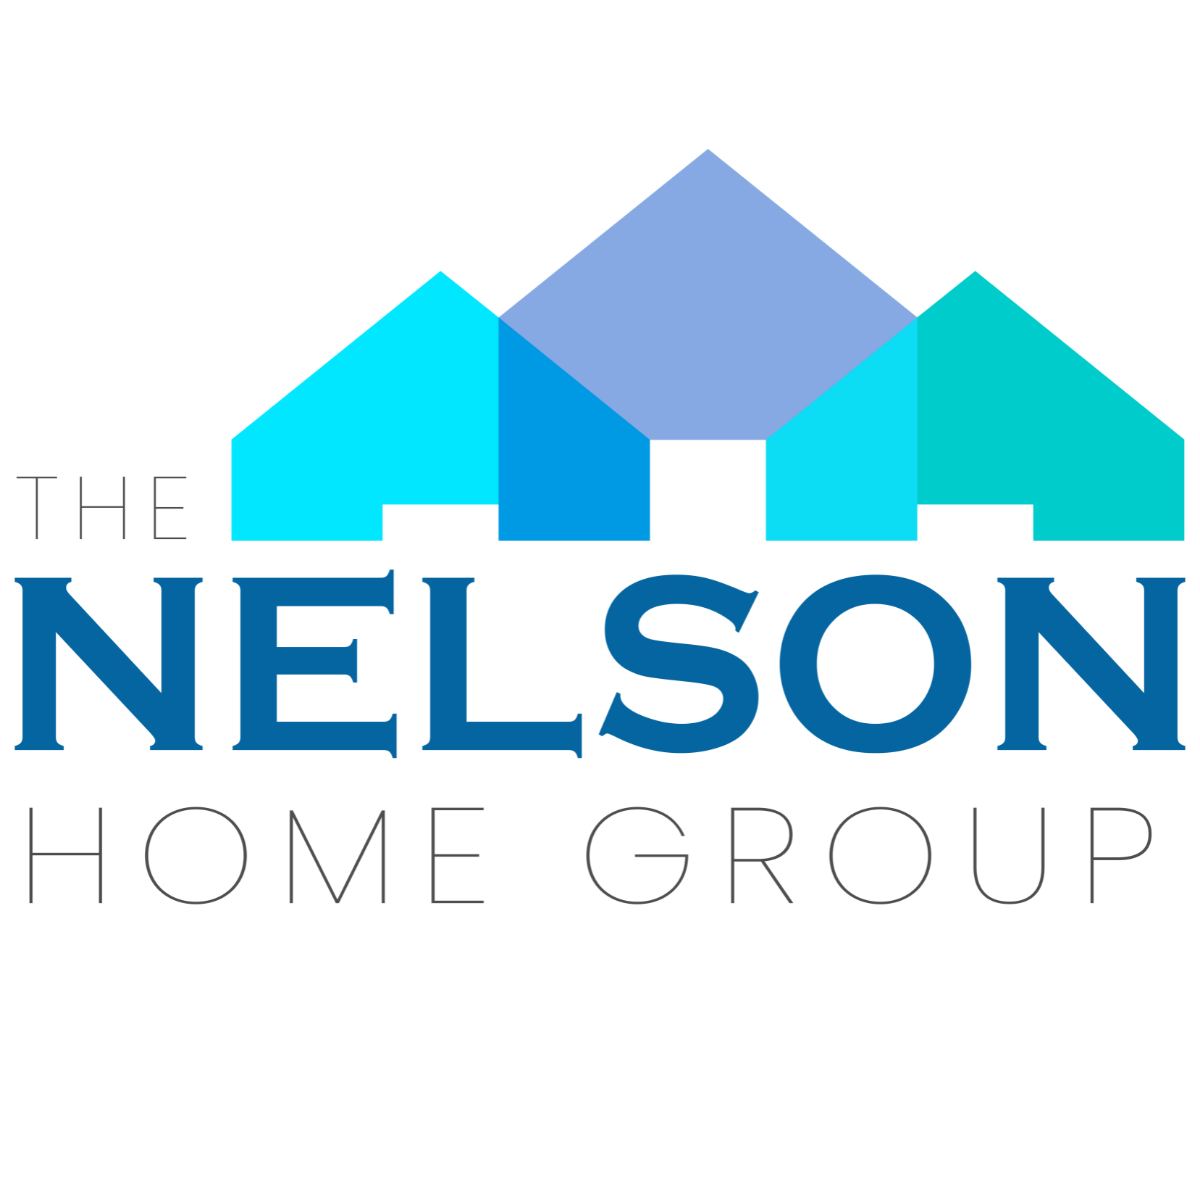 The Nelson Home Group